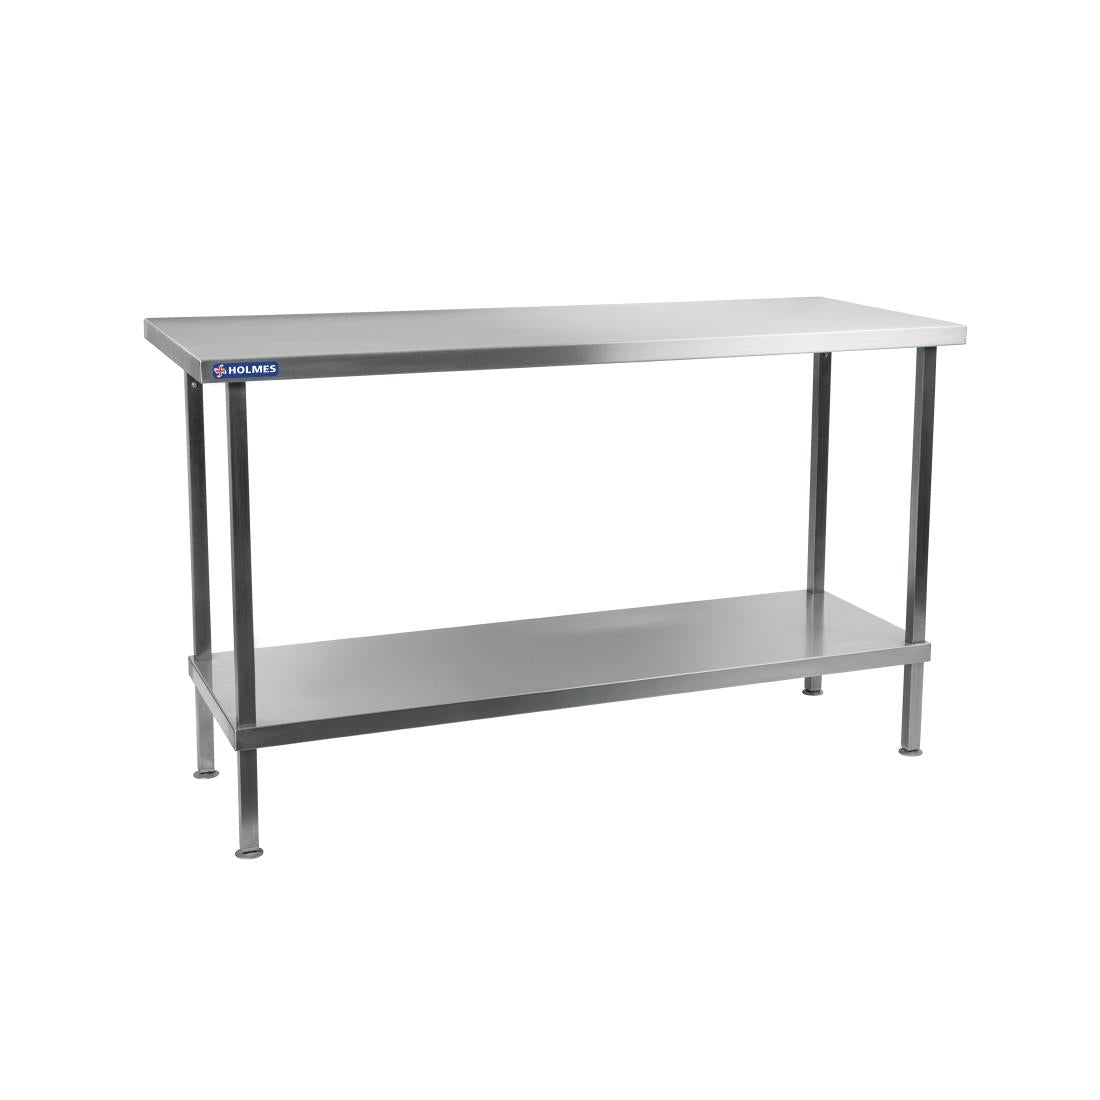 DR056 Holmes Stainless Steel Centre Table 1200mm JD Catering Equipment Solutions Ltd